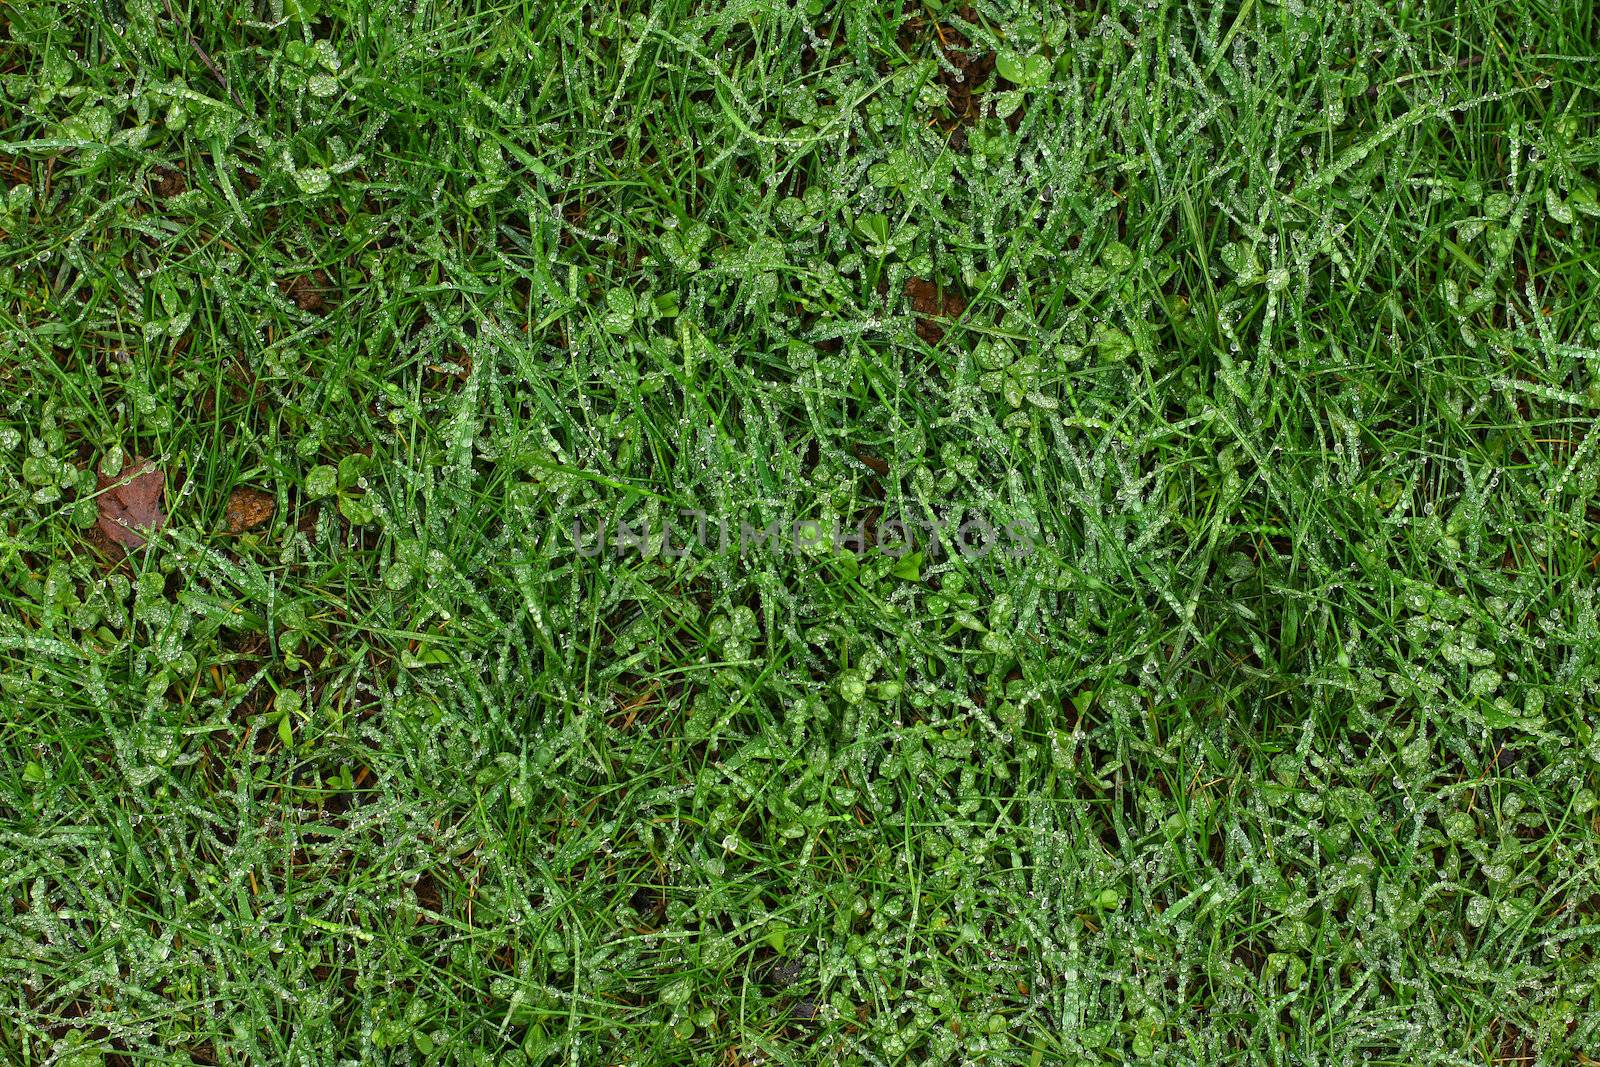 Real morning dew drops on green grass, great for backgrounds or freshness concept